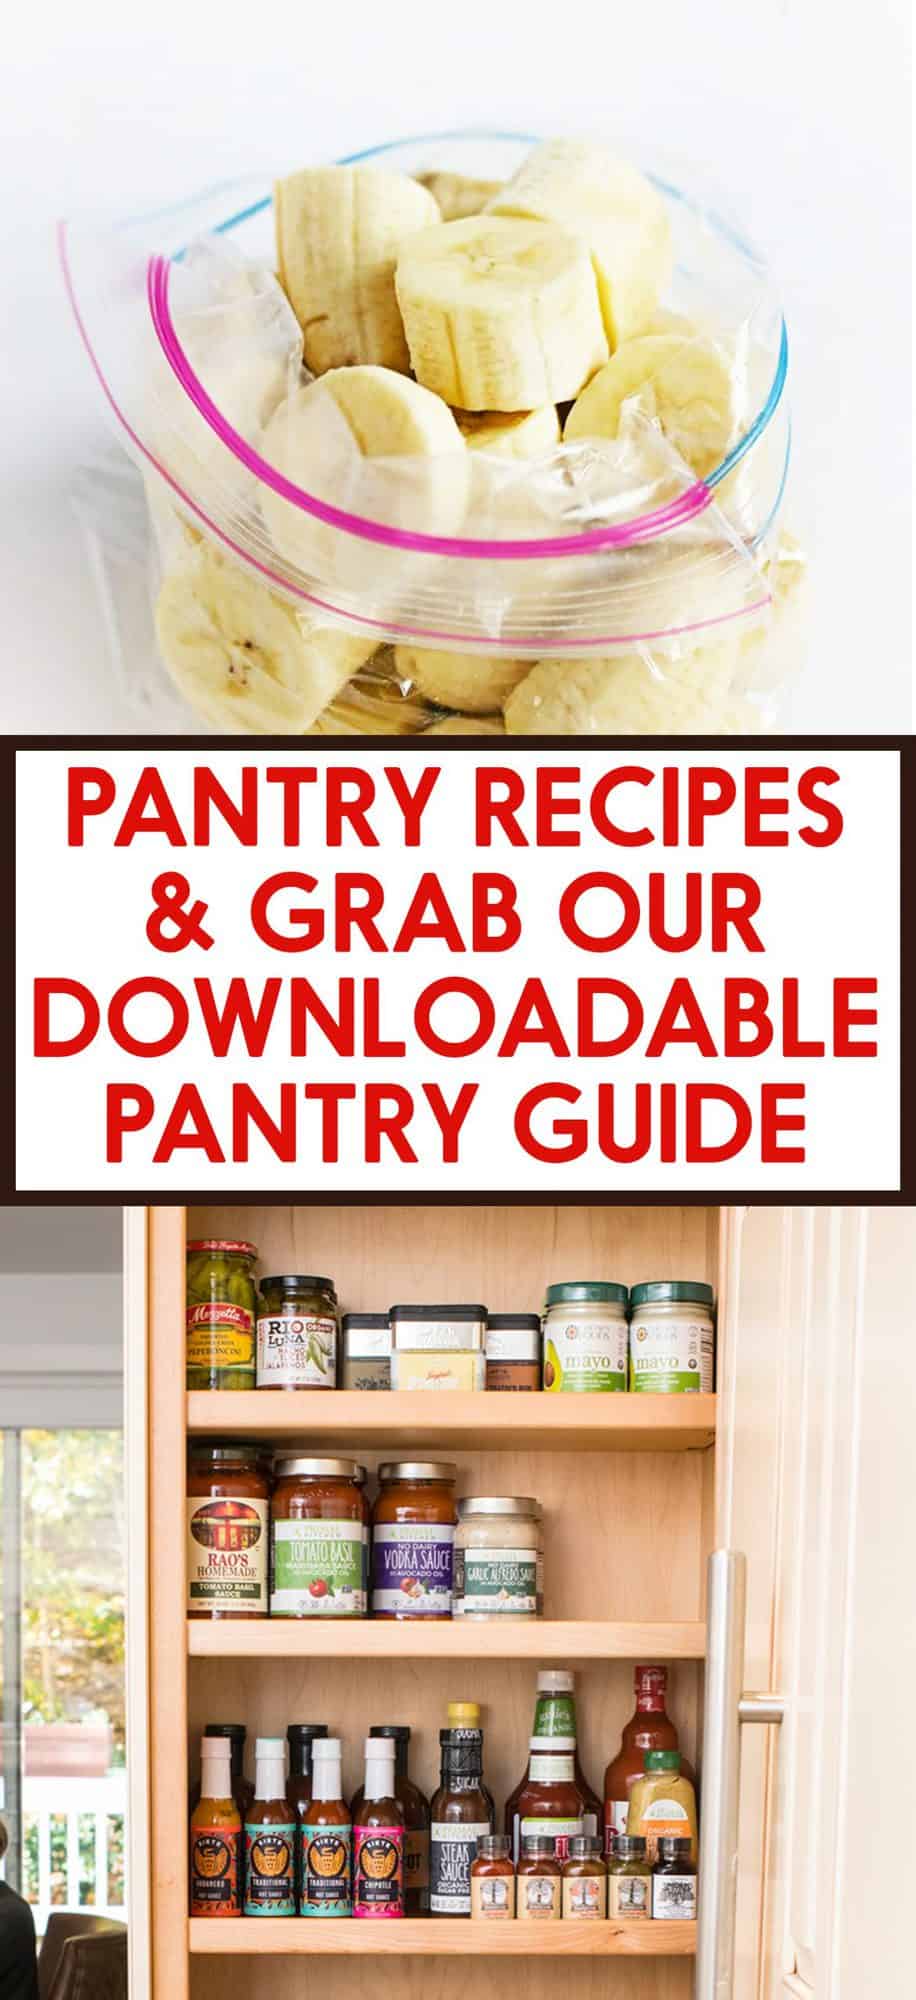 Simple Pantry Recipes and Guide